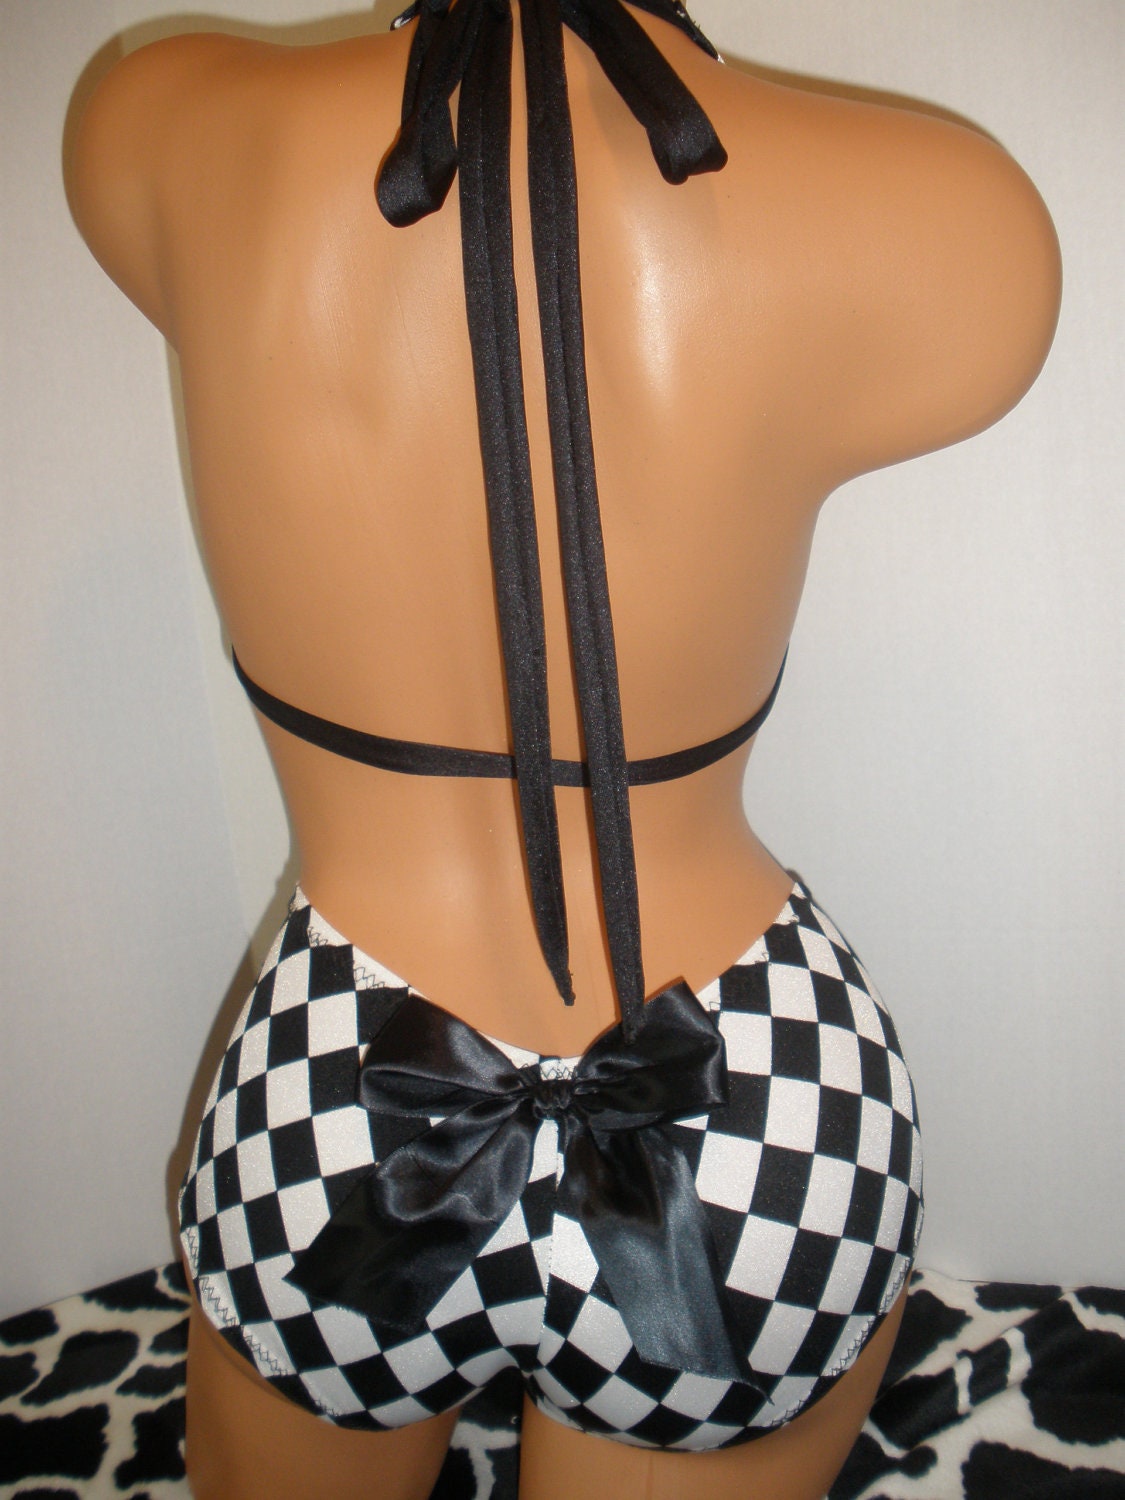 2 Piece Cute Black and White Checkered Swimsuit Short Set with Top and Shorts ( Last One in This Fabric Pattern)